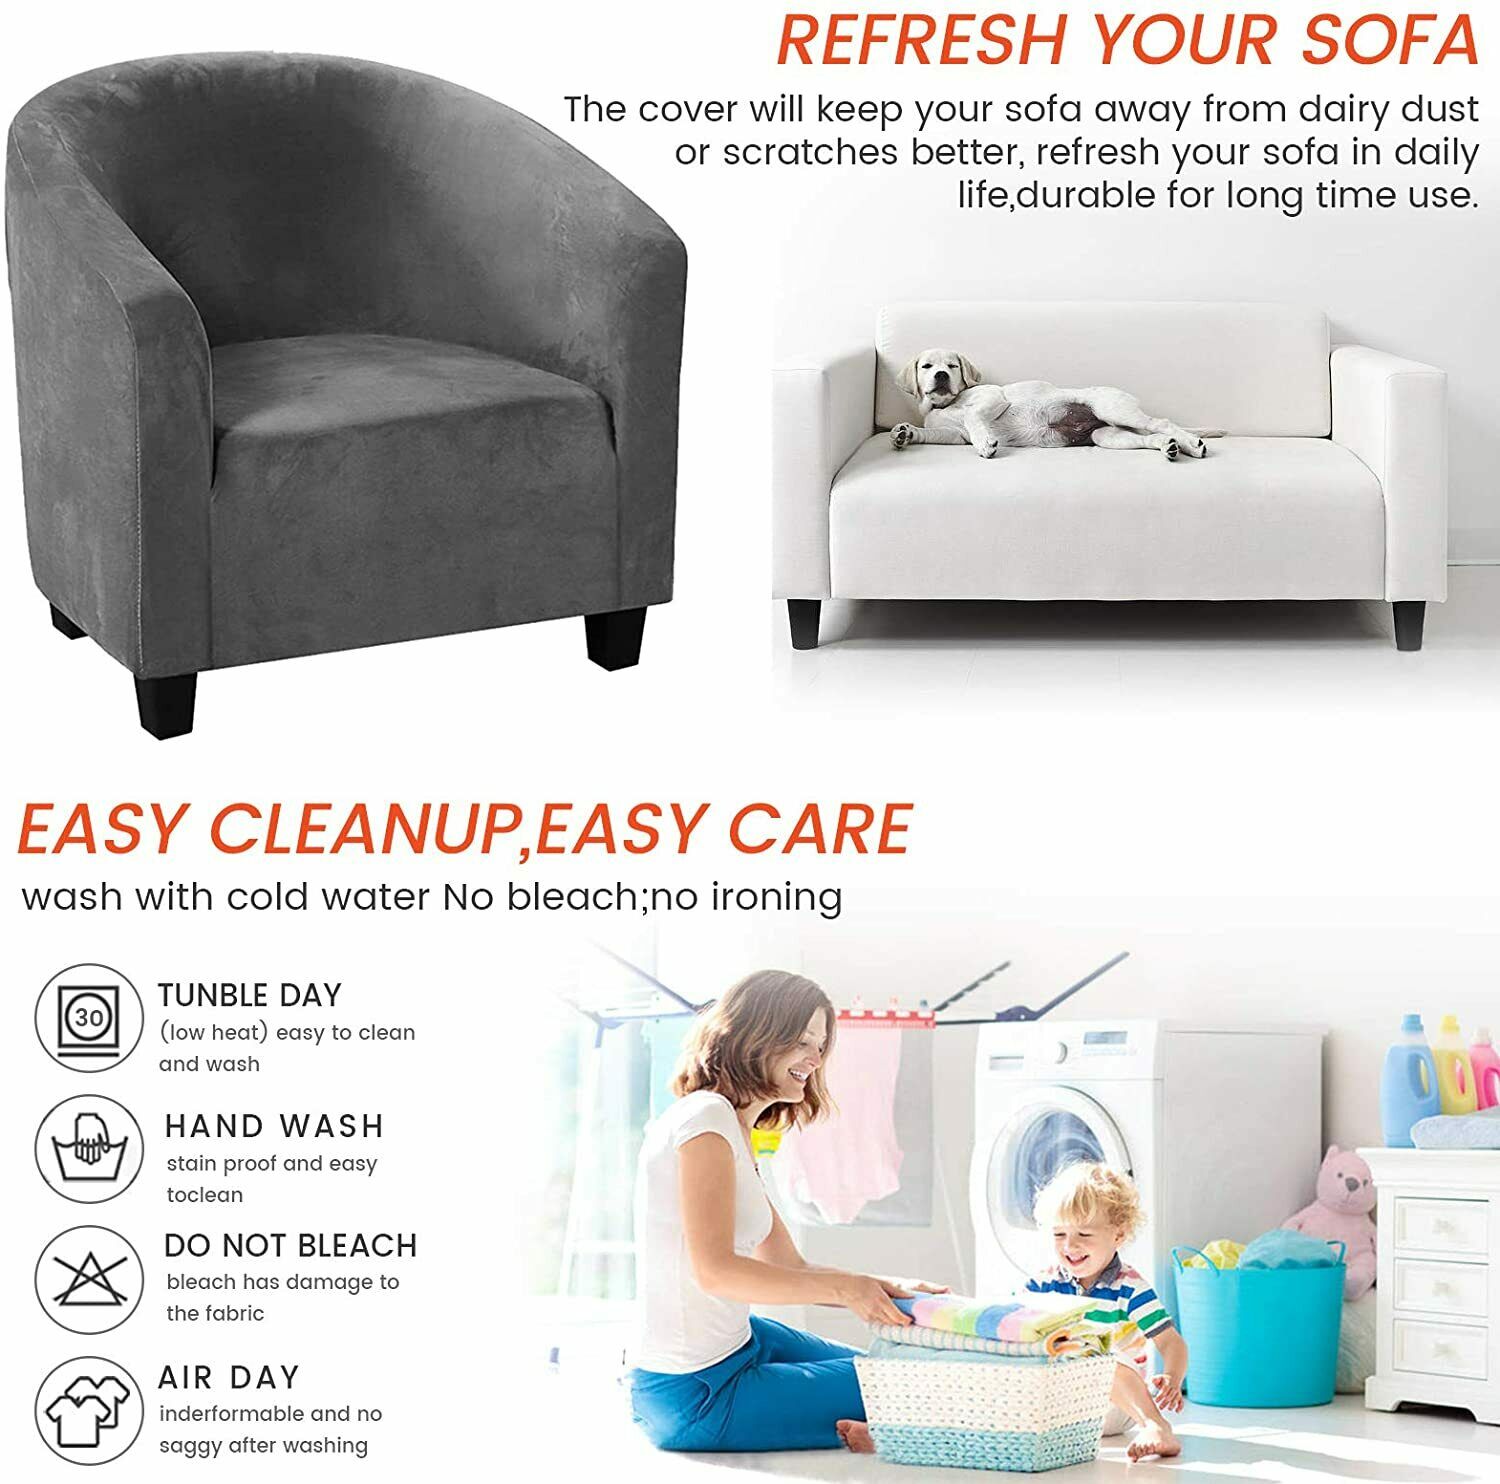 Velvet Tub Chair Cover High Stretch Club Chair Slipcovers Wing Back Armchair Covers Reception Chair Furniture Protector Cover